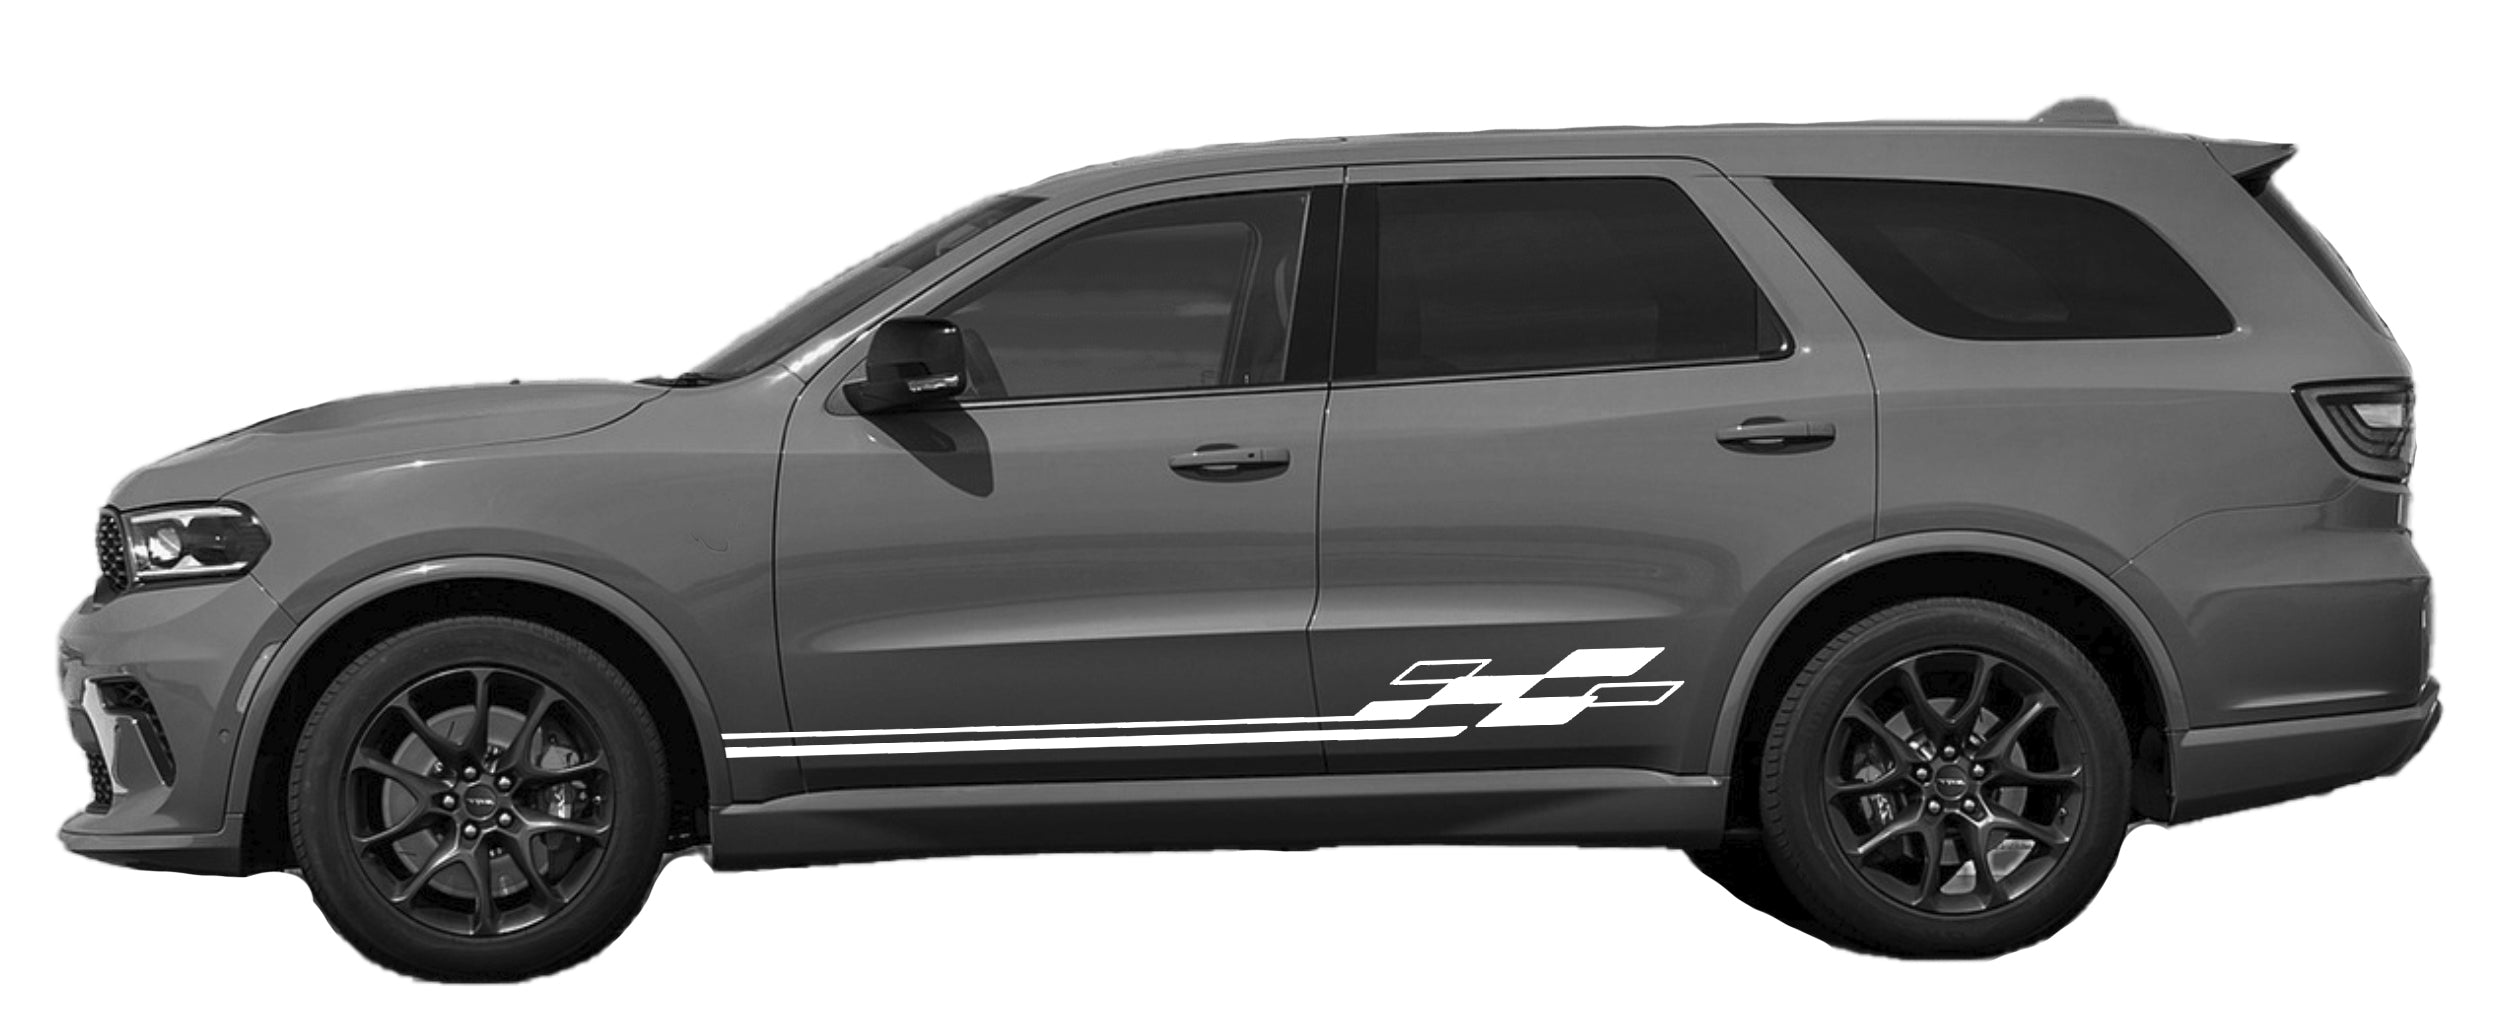 racing stripes for dodge durango 2021 to 2024 models white